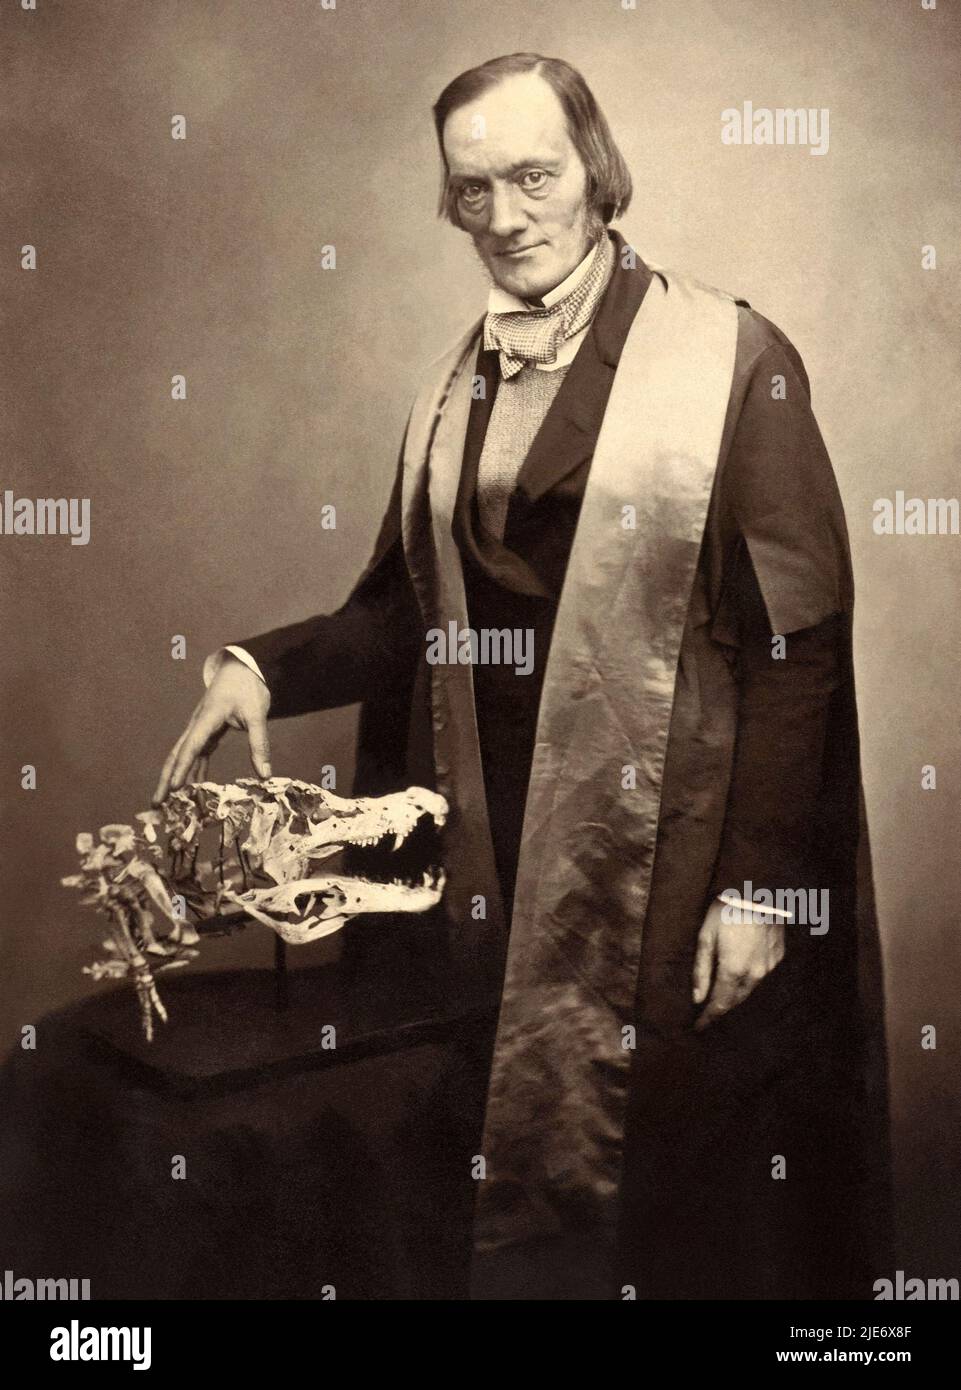 Sir Richard Owen KCB FRS (1804-1892) English biologist, comparative anatomist, and paleontologist who coined the term dinosauria, from which we derive the word dinosaur. Owen was an outspoken critic of Charles Darwin's theory of evolution by natural selection. Photo: 1856. Stock Photo